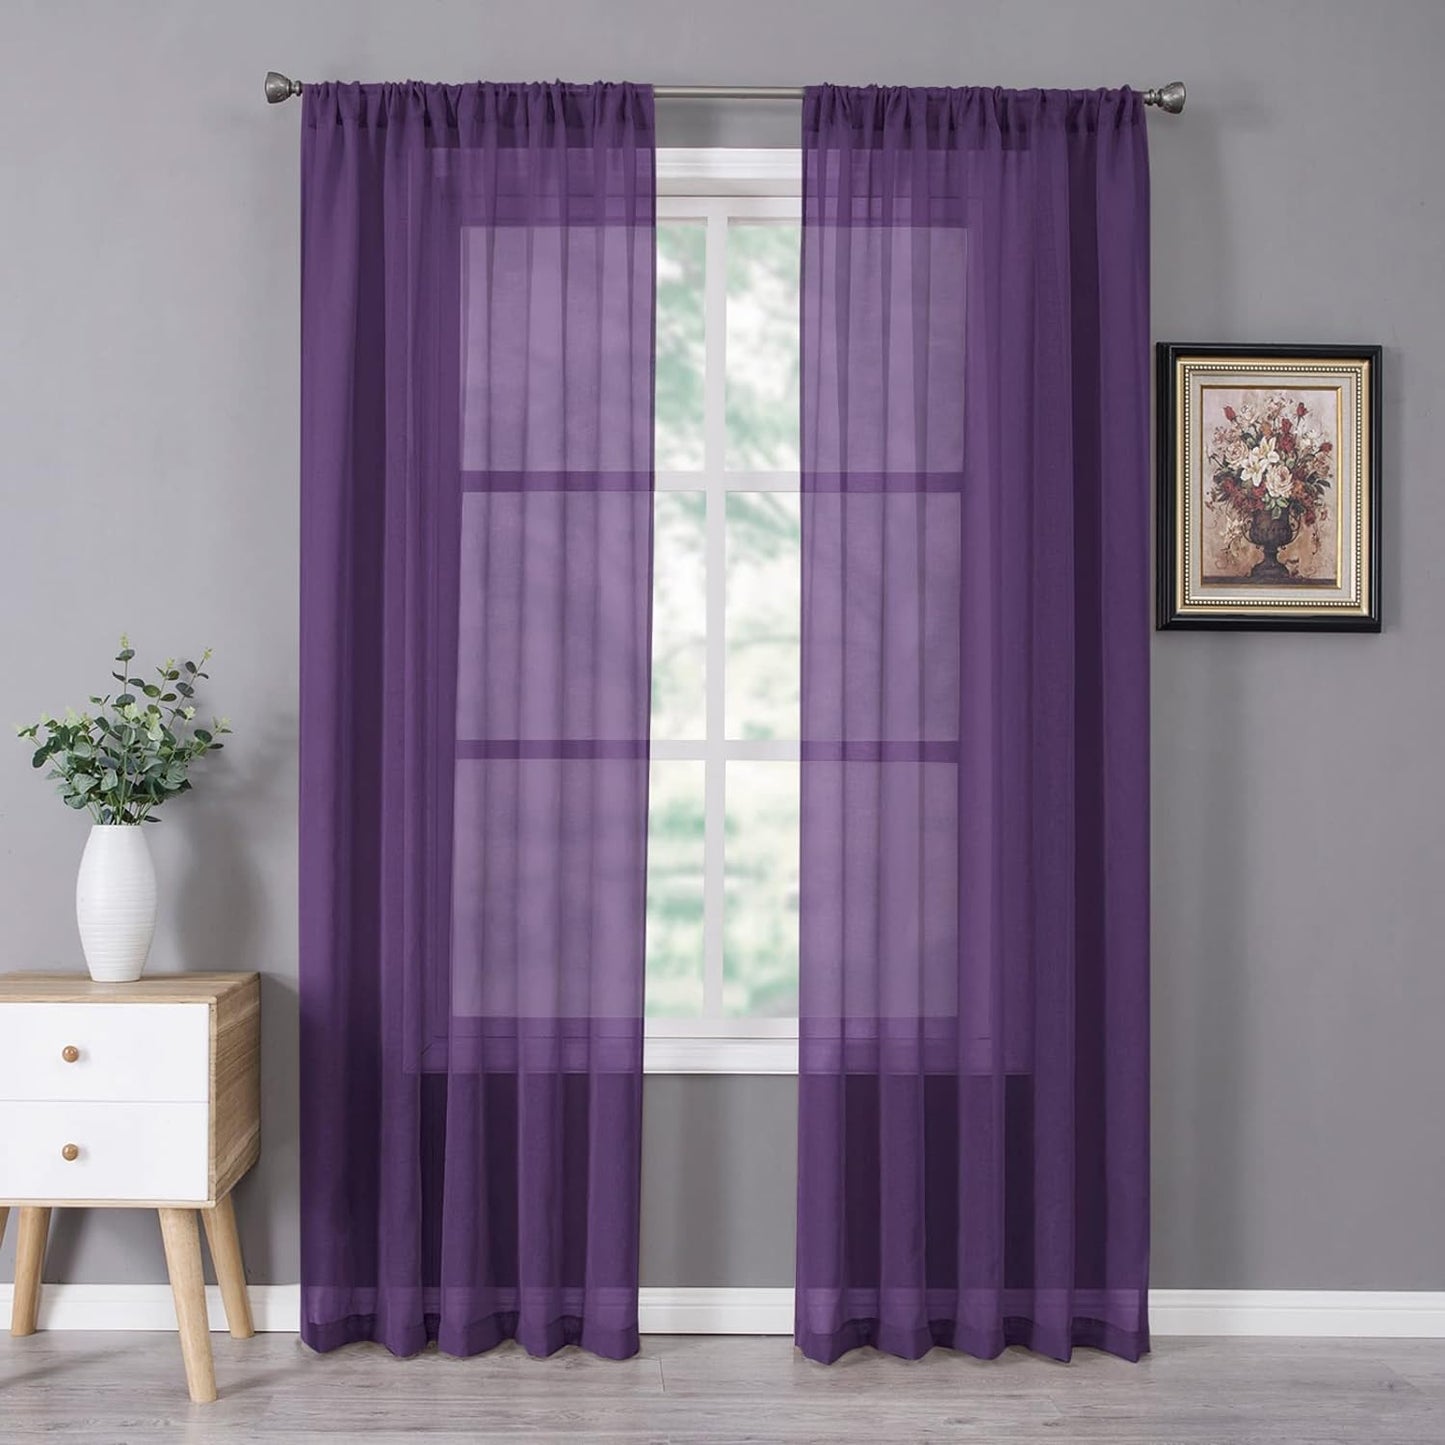 Tollpiz Short Sheer Curtains Linen Textured Bedroom Curtain Sheers Light Filtering Rod Pocket Voile Curtains for Living Room, 54 X 45 Inches Long, White, Set of 2 Panels  Tollpiz Tex Royal Purple 54"W X 72"L 